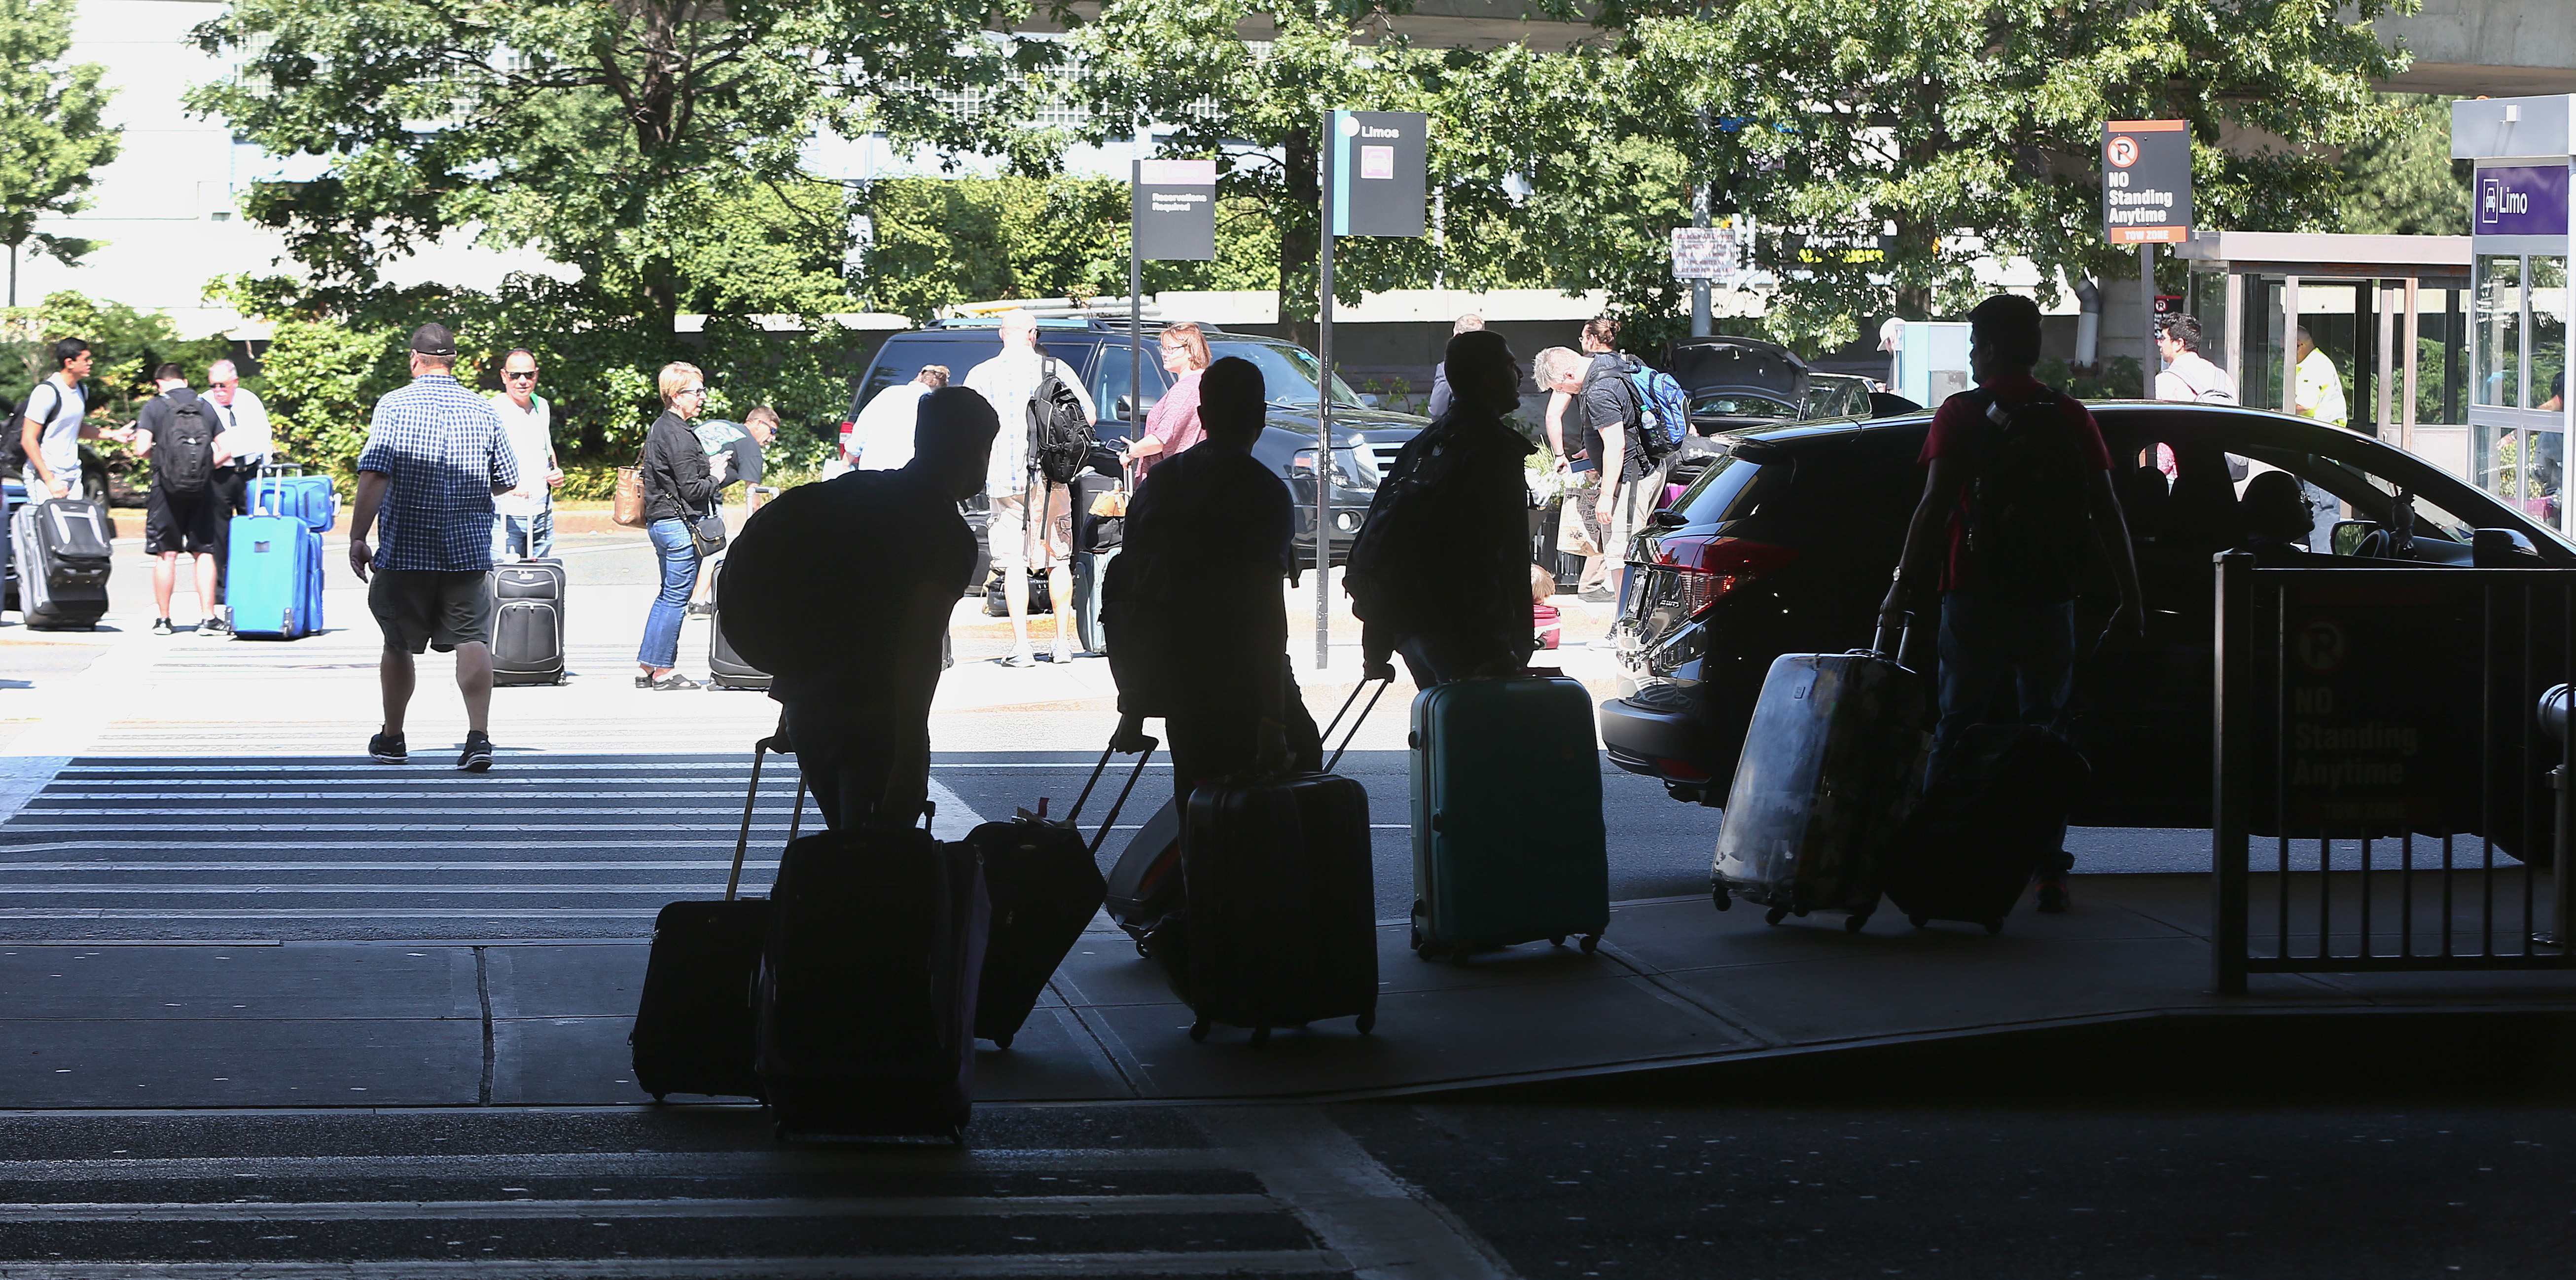 People rolling suitcases behind them as they emerge from cars at the airport.